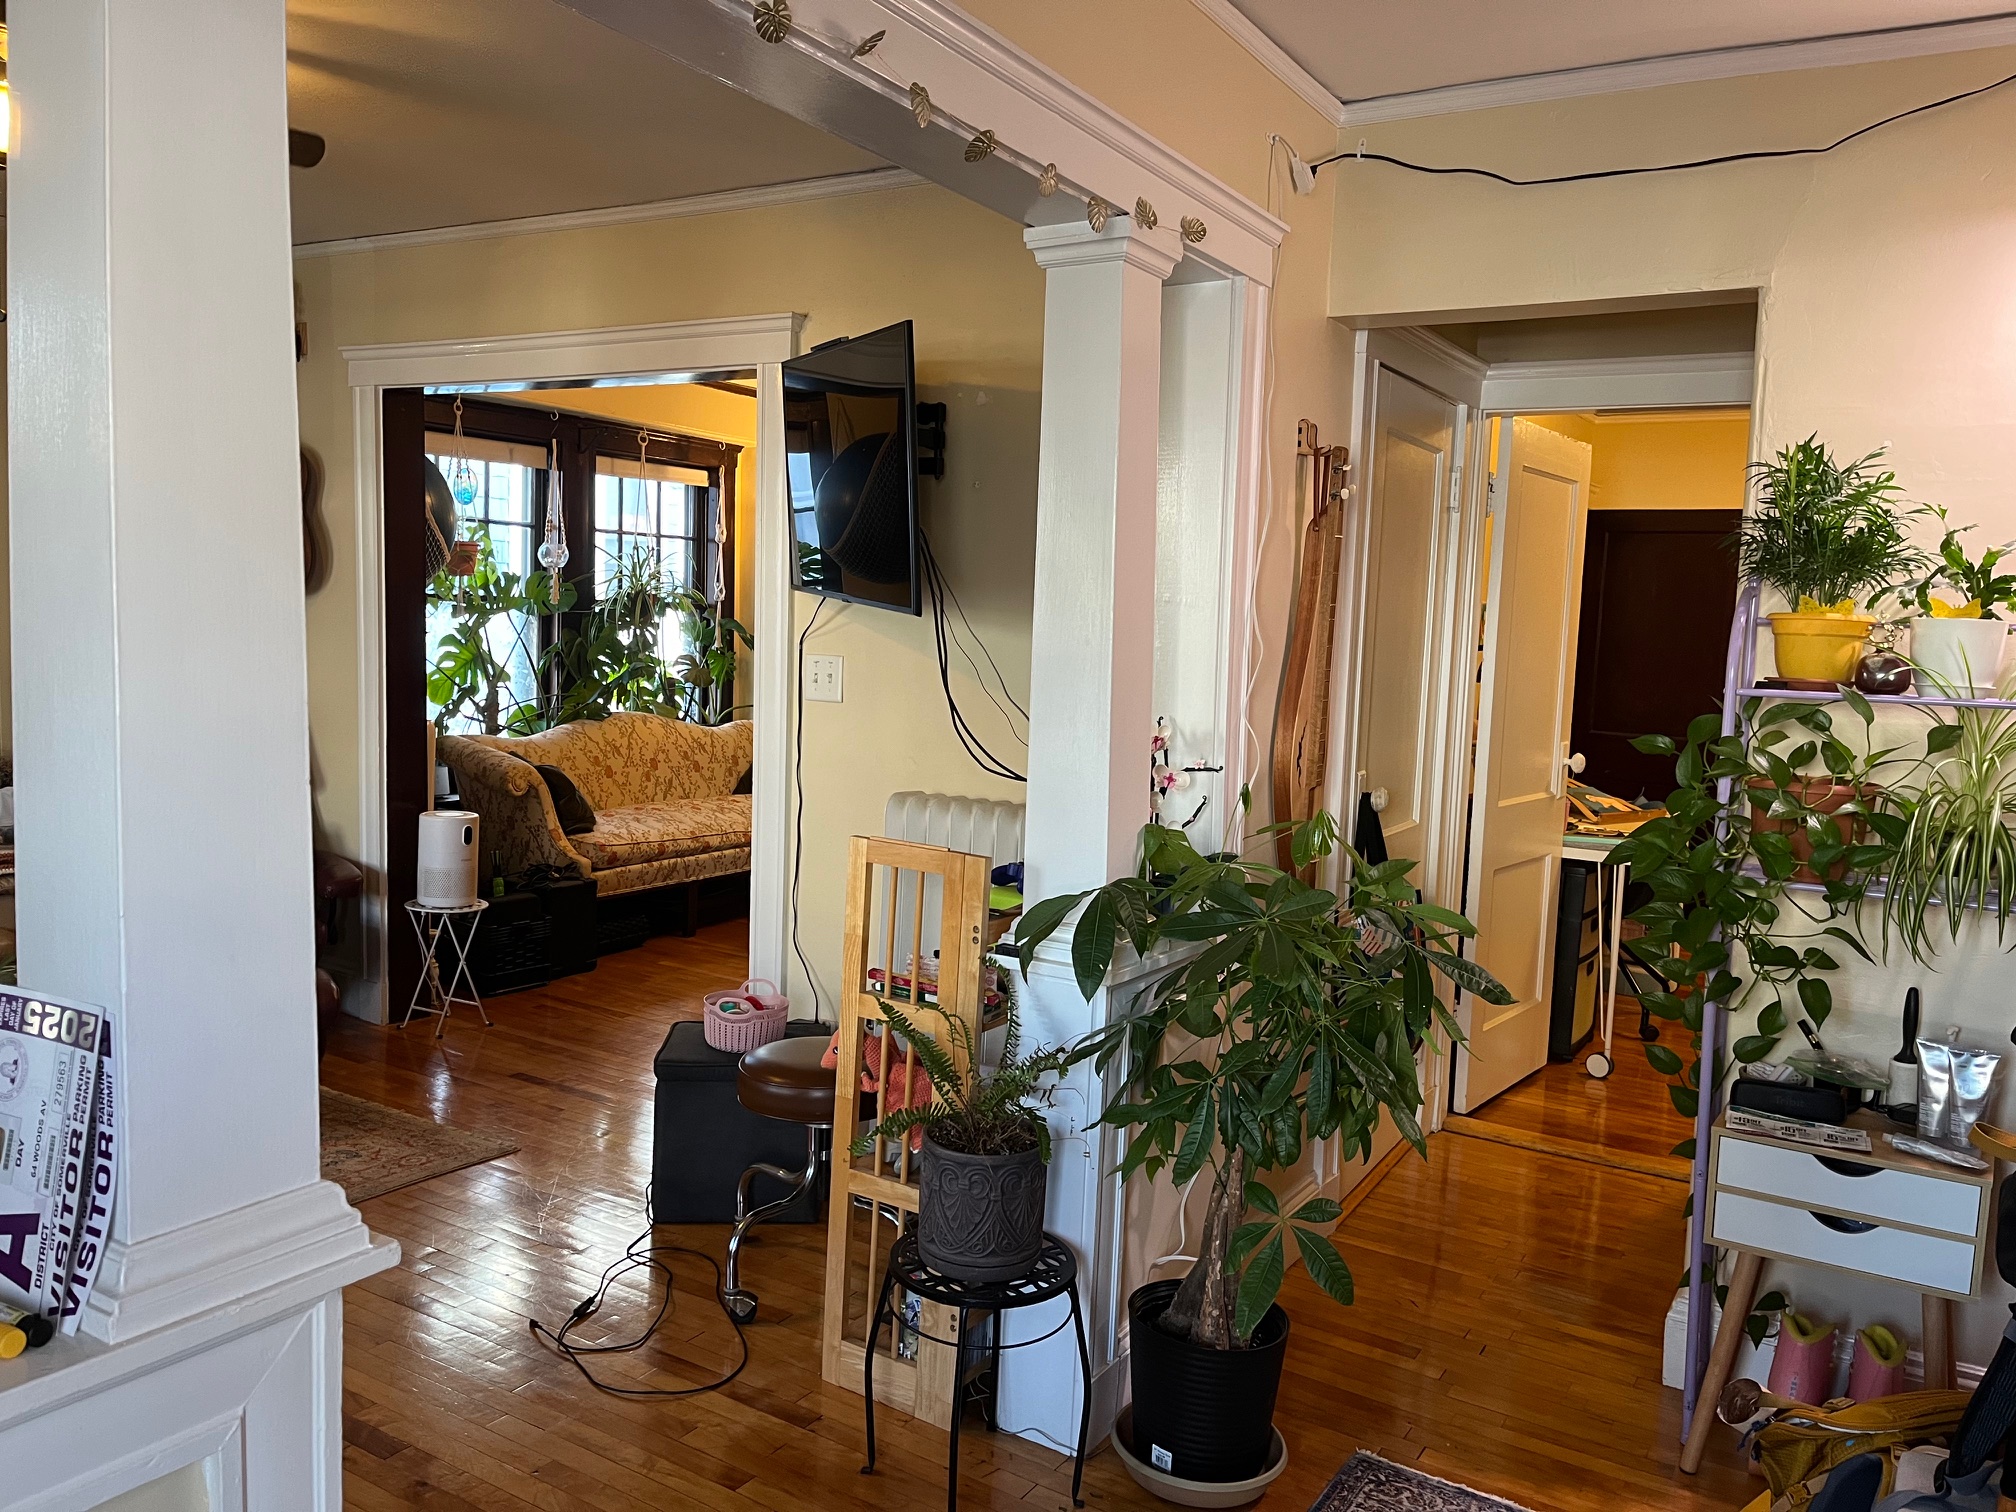 Photos of apartment on Woods,Somerville MA 02144